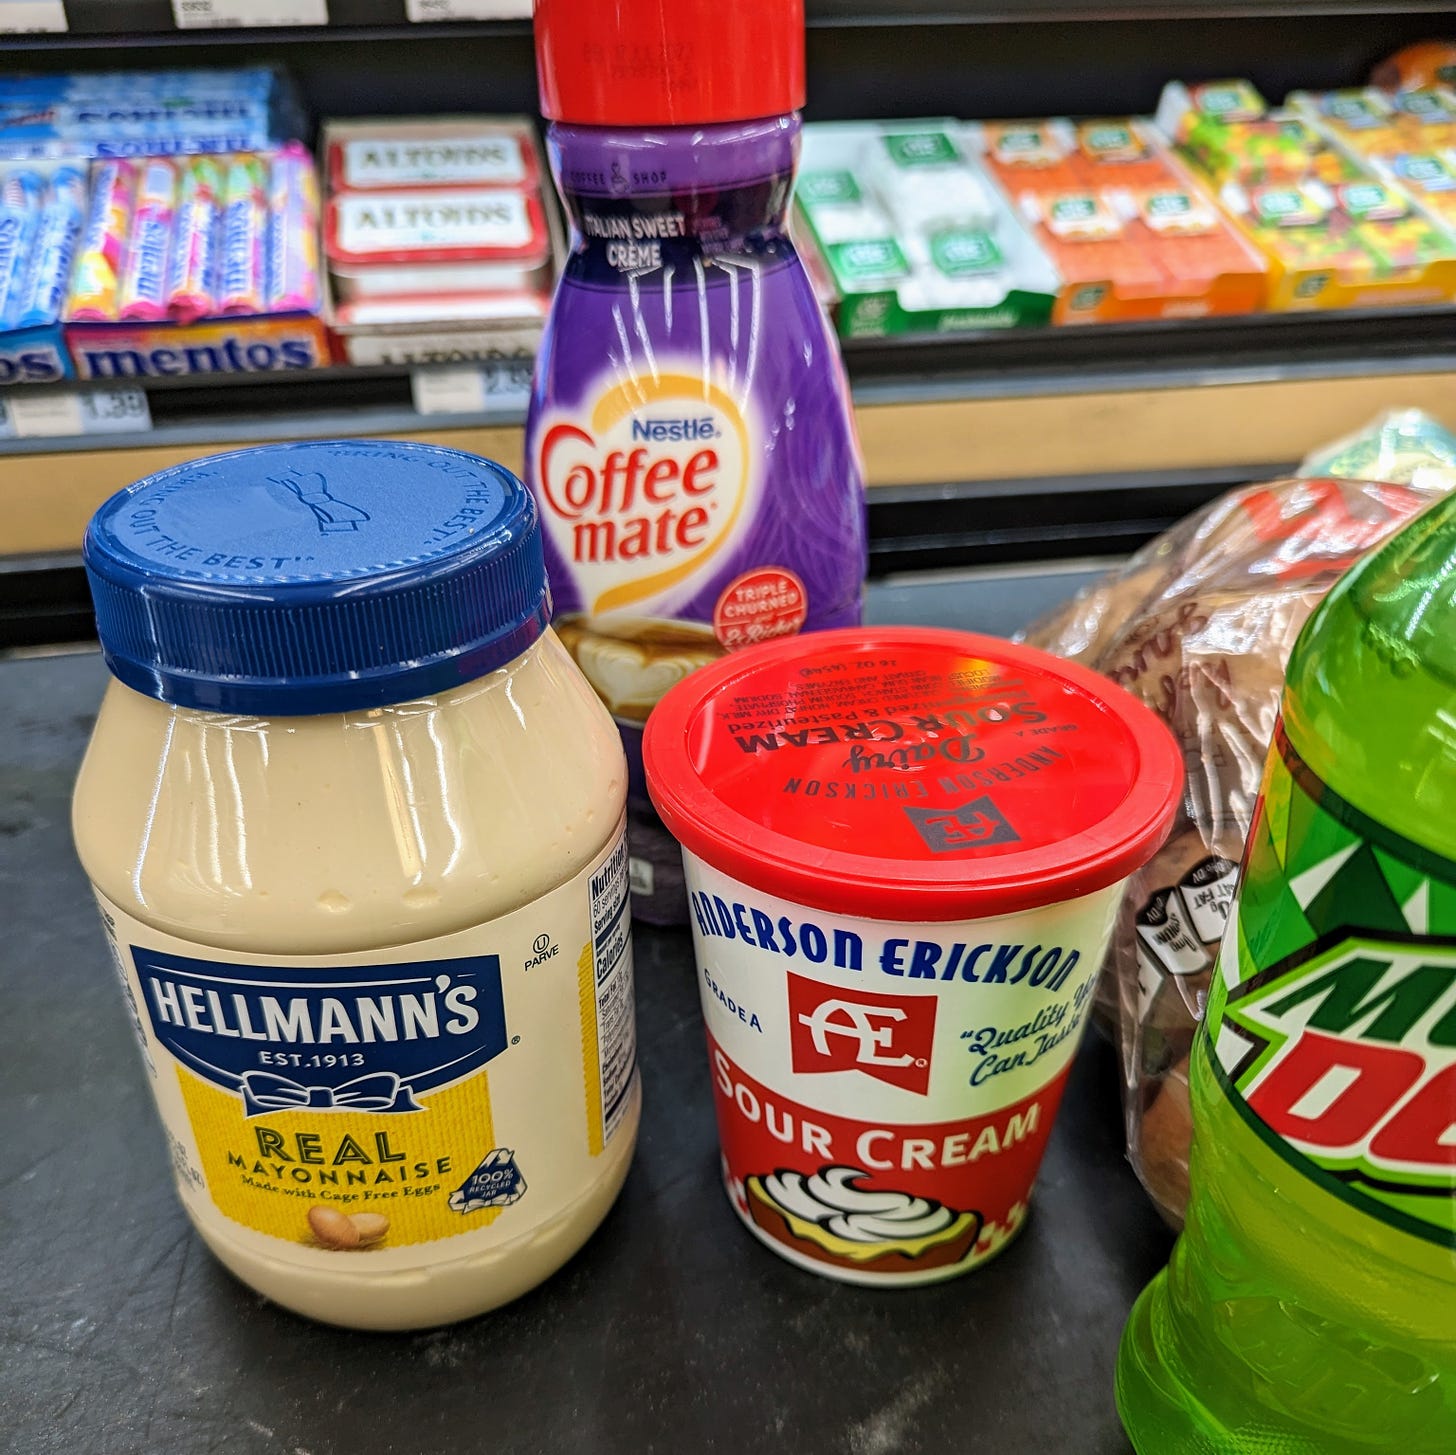 Mayo, sour cream, coffee creamer, mountain dew, and potatoes at a grocery store